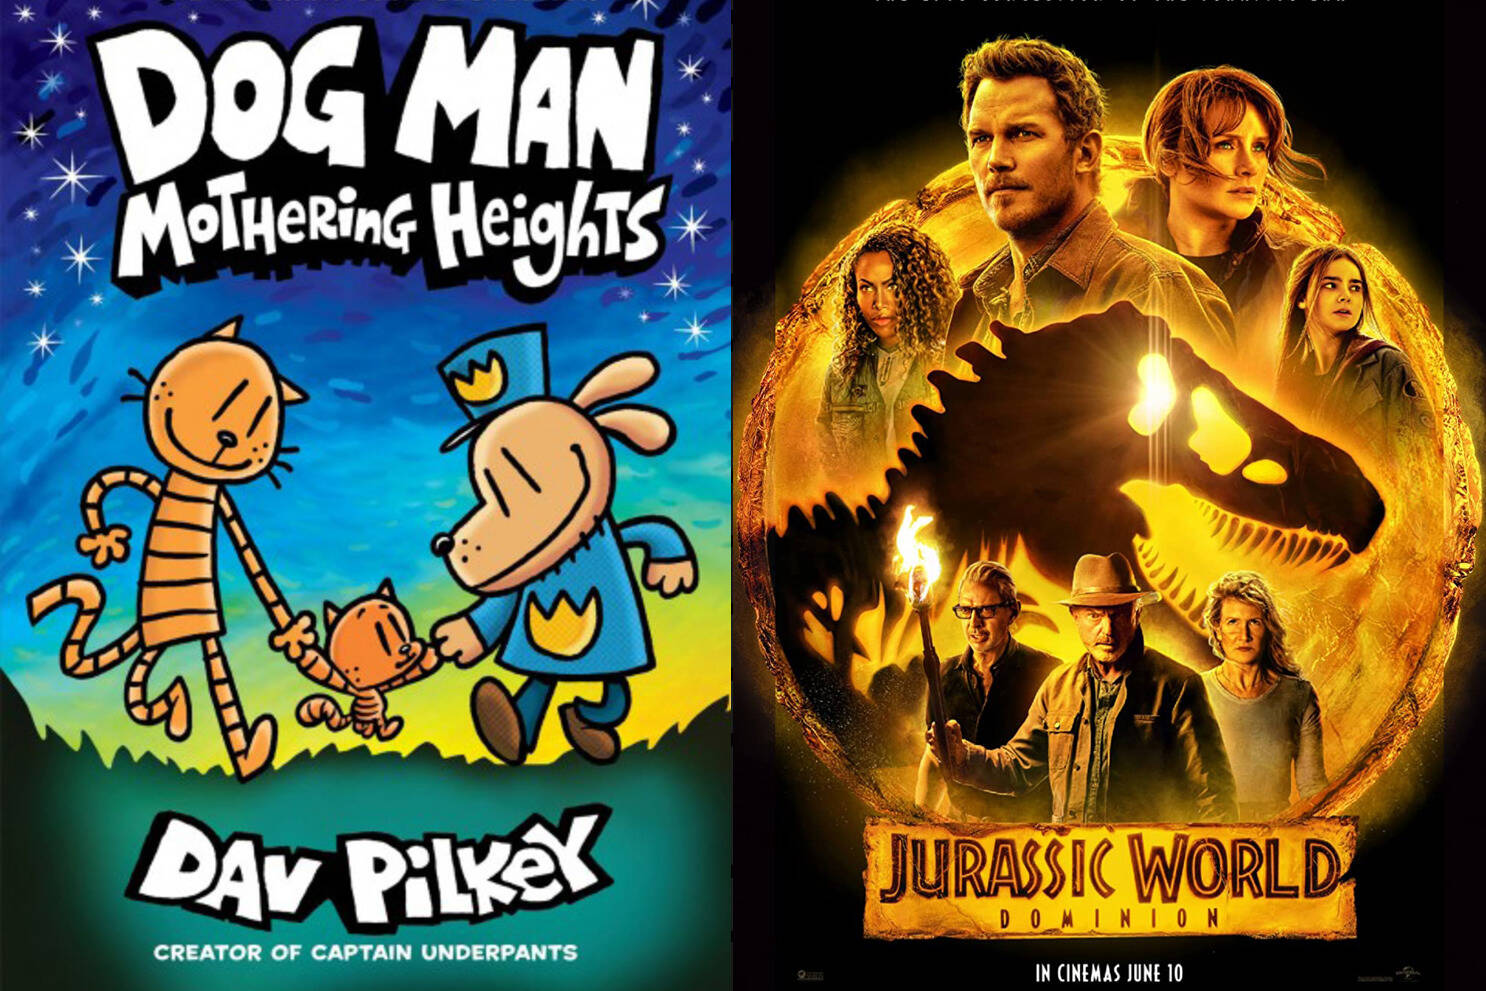 Dav Pilkey’s Dog Man, Mothering Heights was the top pick for kids, and Jurassic World was the top pick for moviegoers at the Fraser Valley Regional Library in 2022. (FVRL images)